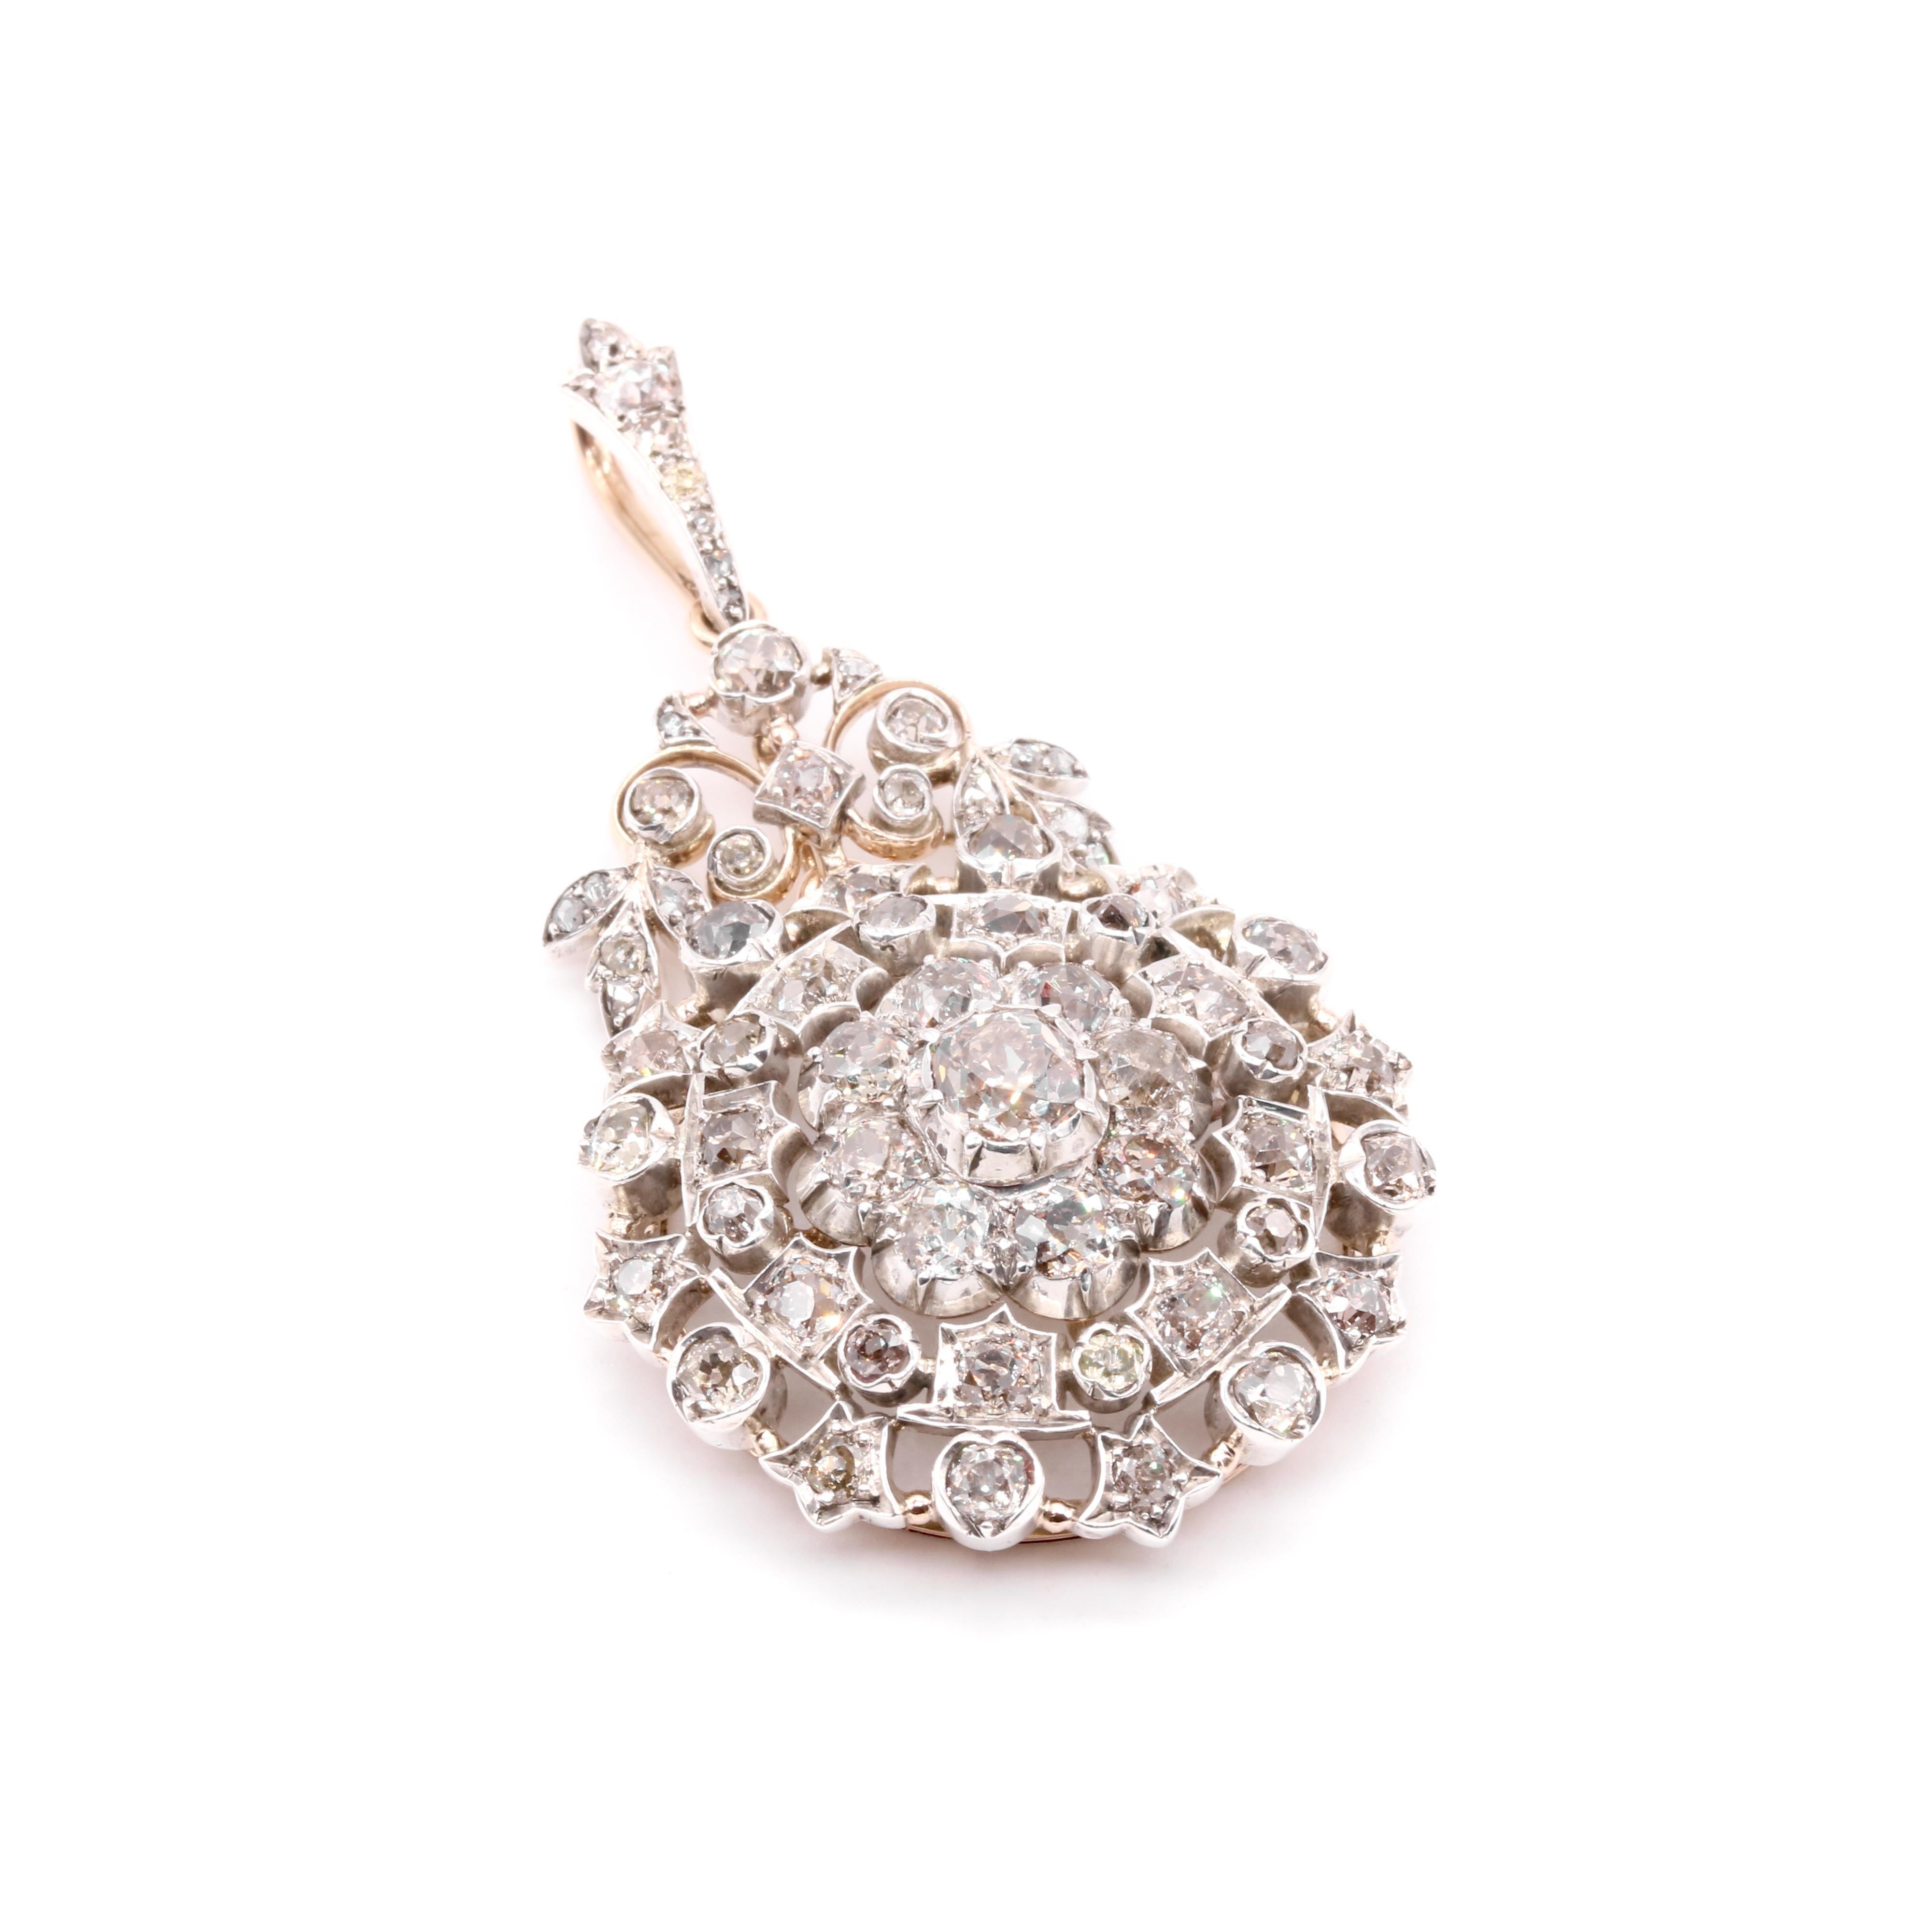 A Victorian diamond, silver, and yellow gold brooch and pendant, comprising one large old mine cut diamond, fifty-two smaller old mine cut diamonds, and fifteen rose cut diamonds, set in silver, and backed in 15 karat yellow gold, with detachable